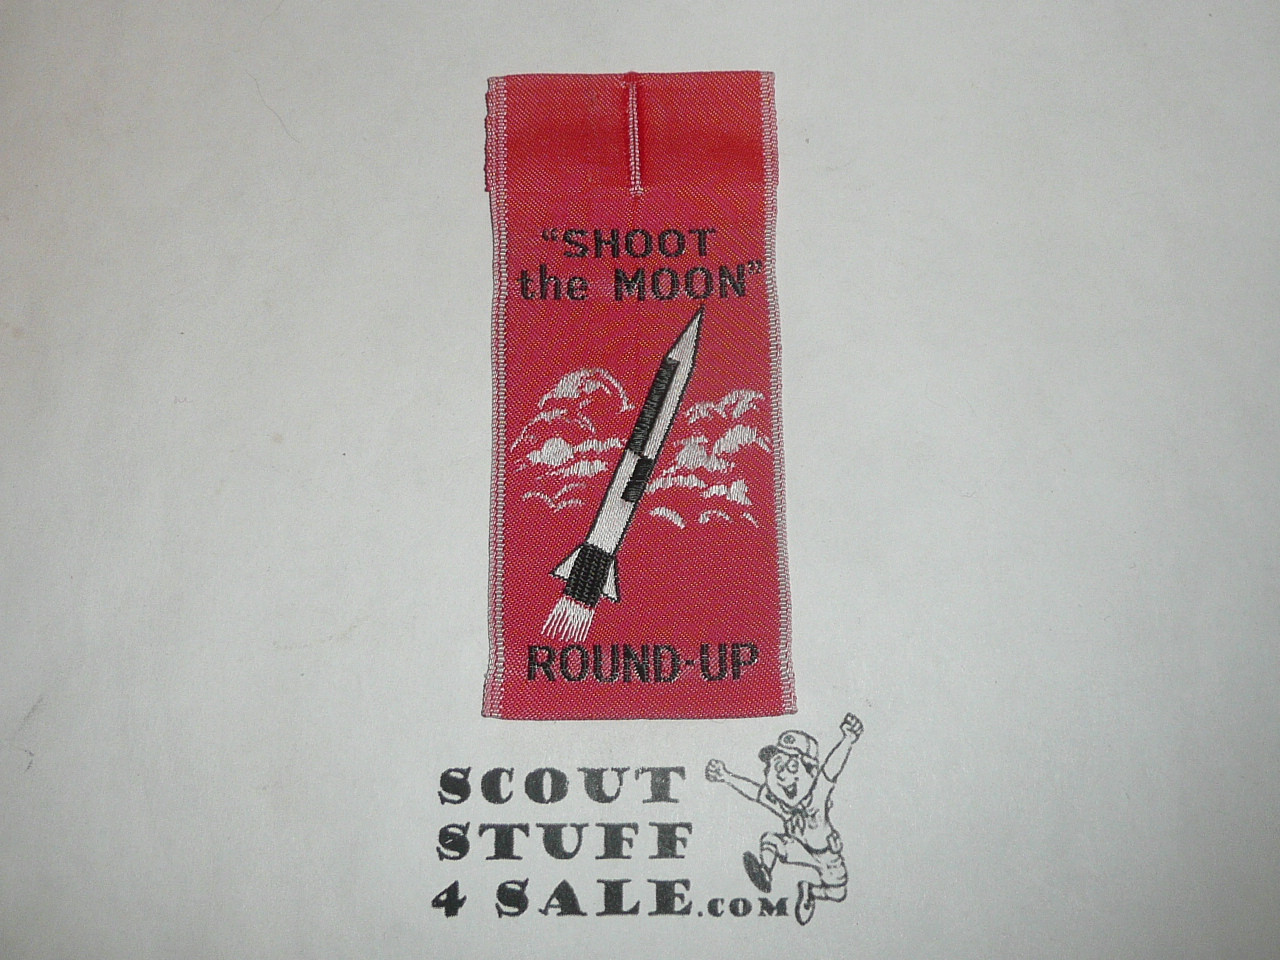 Shoot the Moon Round-up Woven Patch, Generic BSA issue